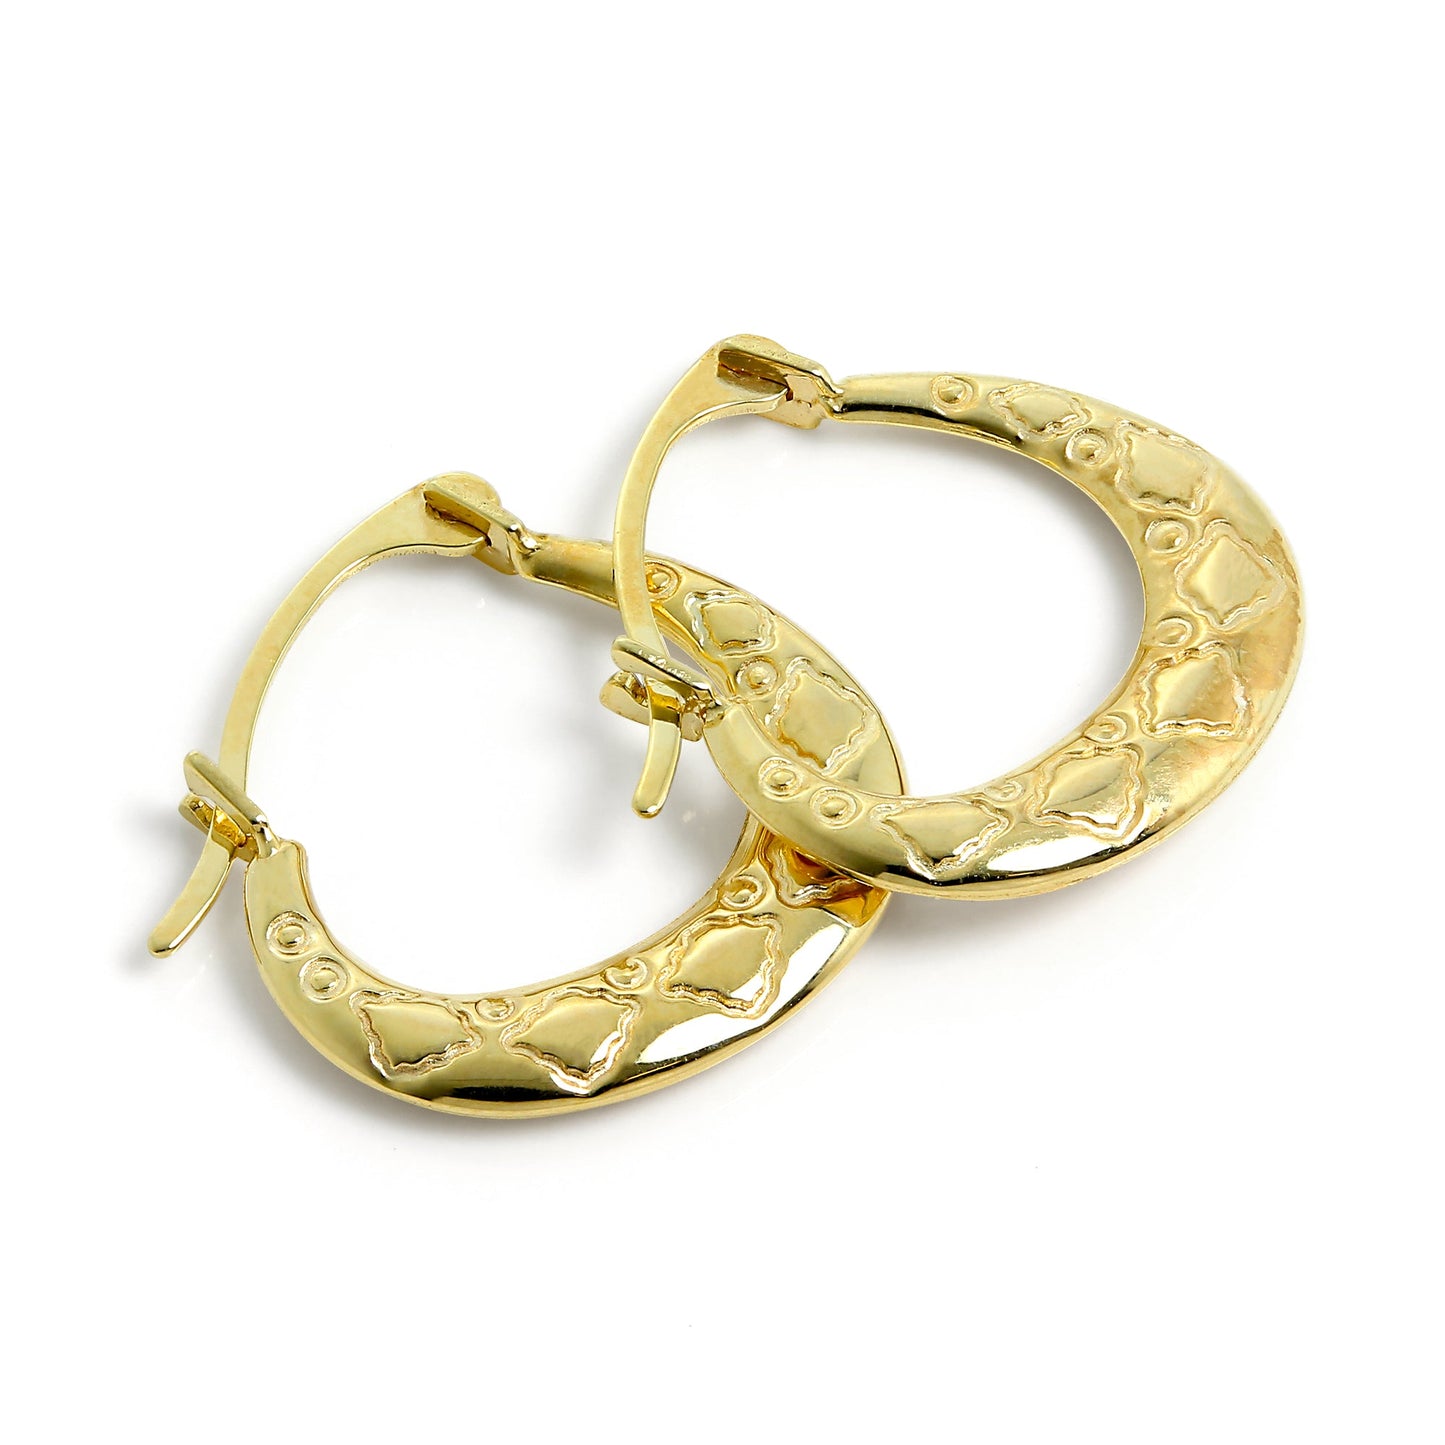 Small 9ct Gold Patterned Creole Hoop Earrings